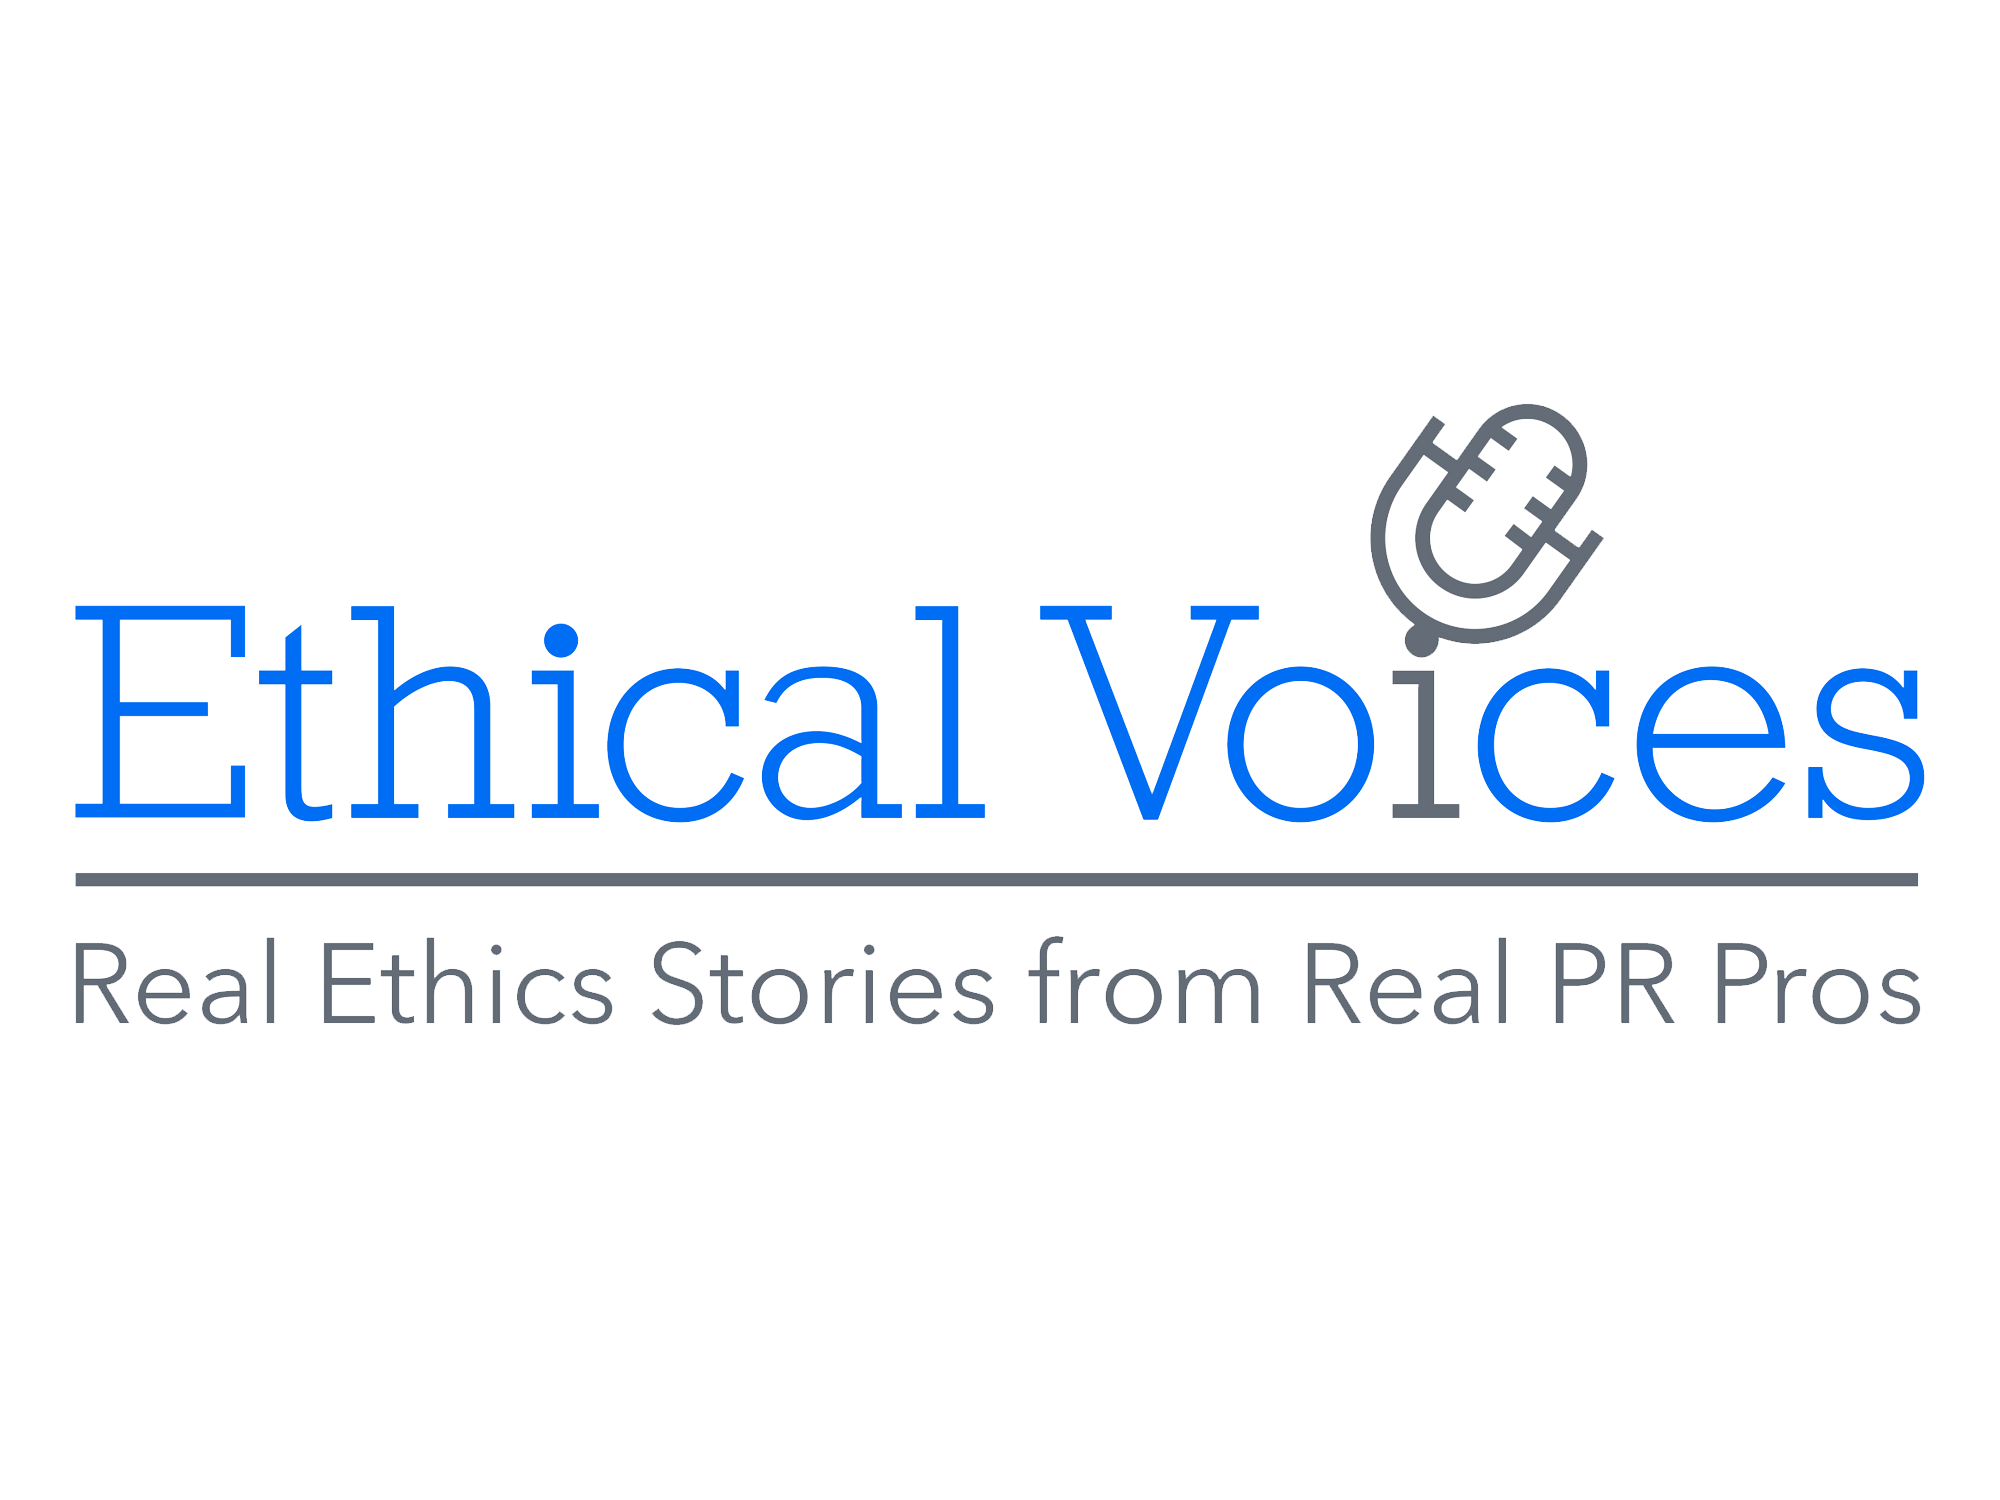 Ethical Voices_2019.08.19_edited, transparent, mounted_FAV.png